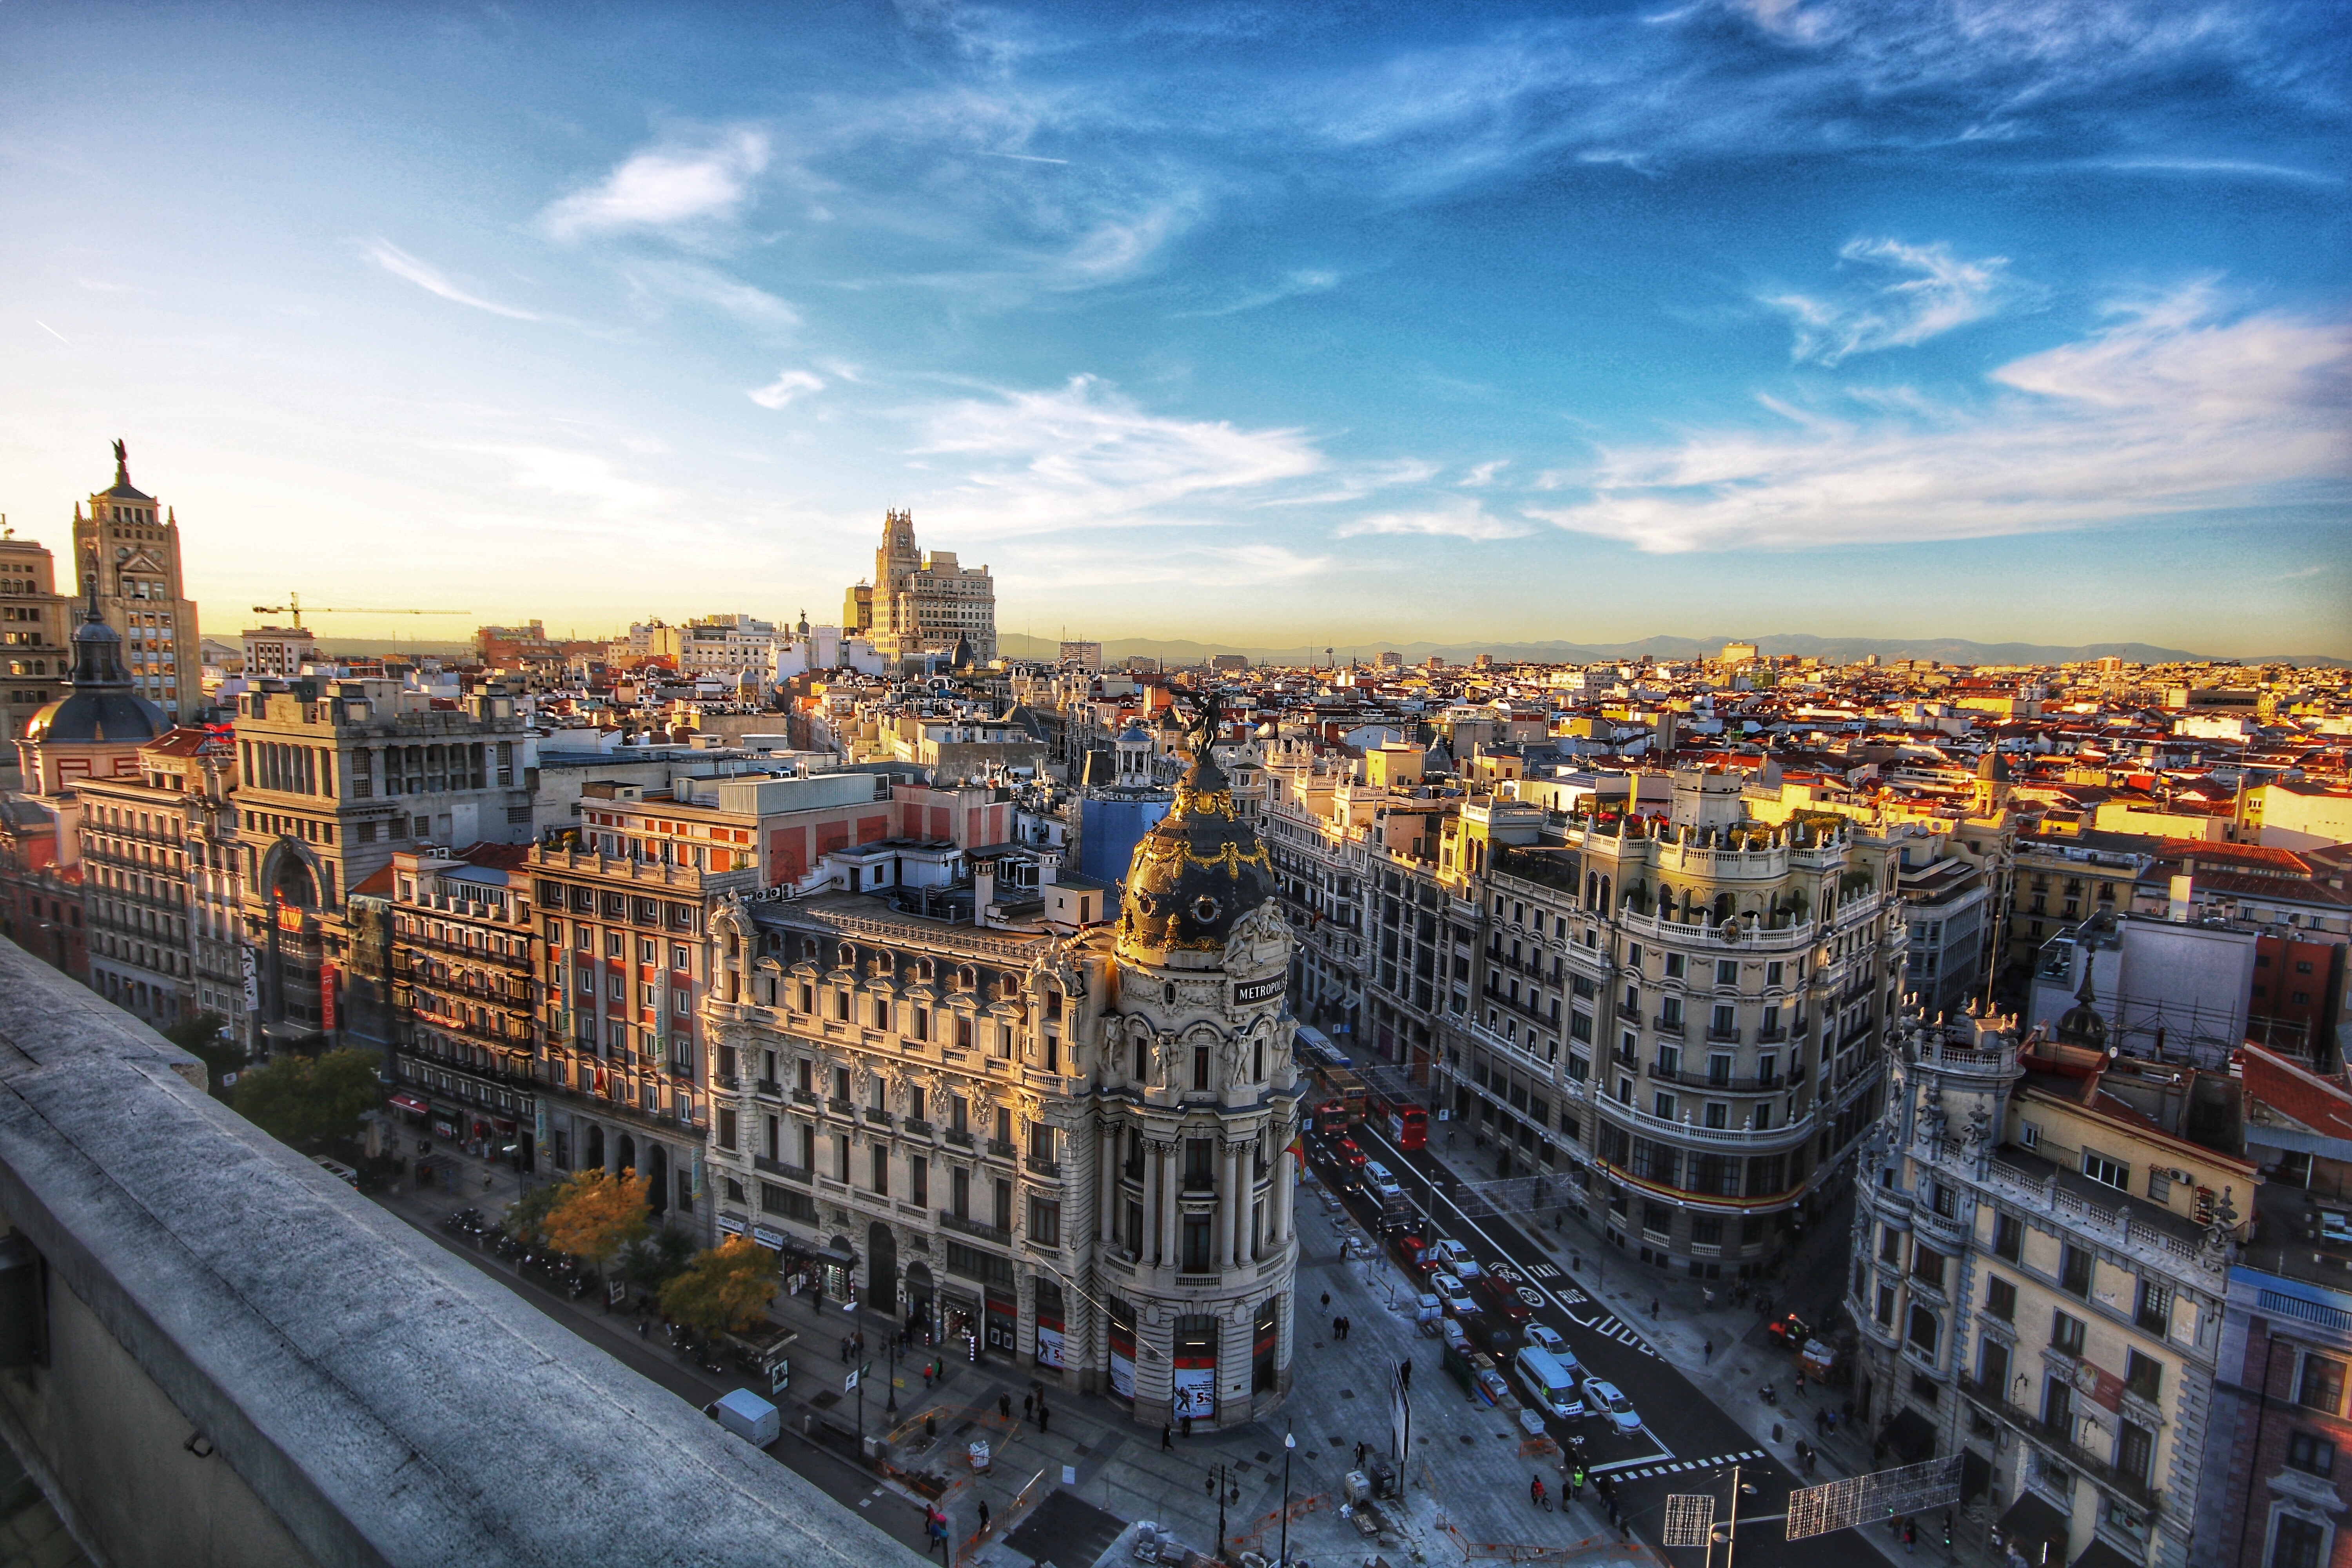 A big city like Madrid has tons of options for job seekers